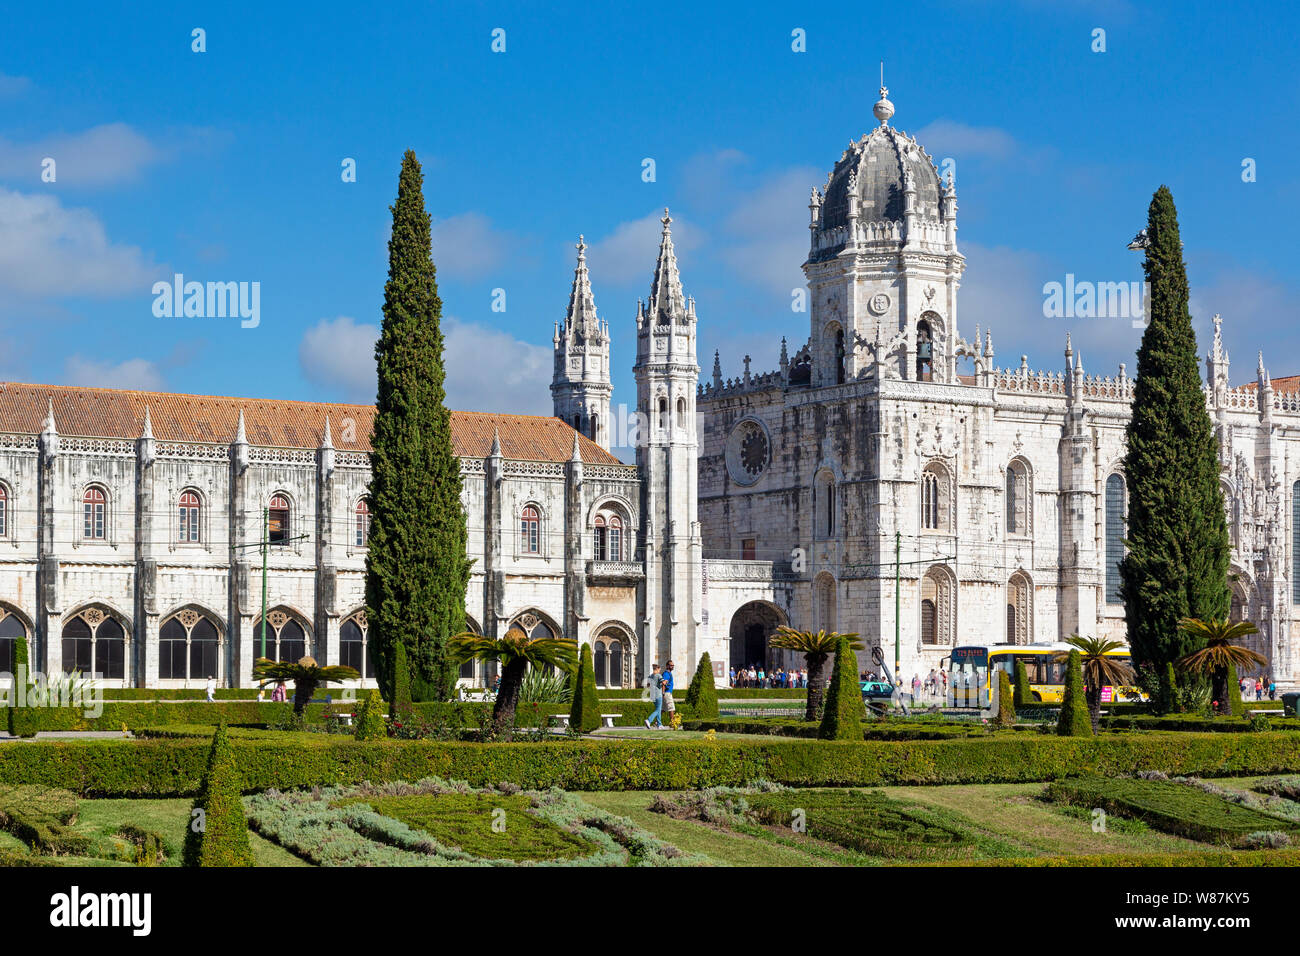 Lisbon, Portugal. The Mosteiro dos Jeronimos, or the Monastery of the Hieronymites. The monastery is considered a triumph of Manueline architecture an Stock Photo